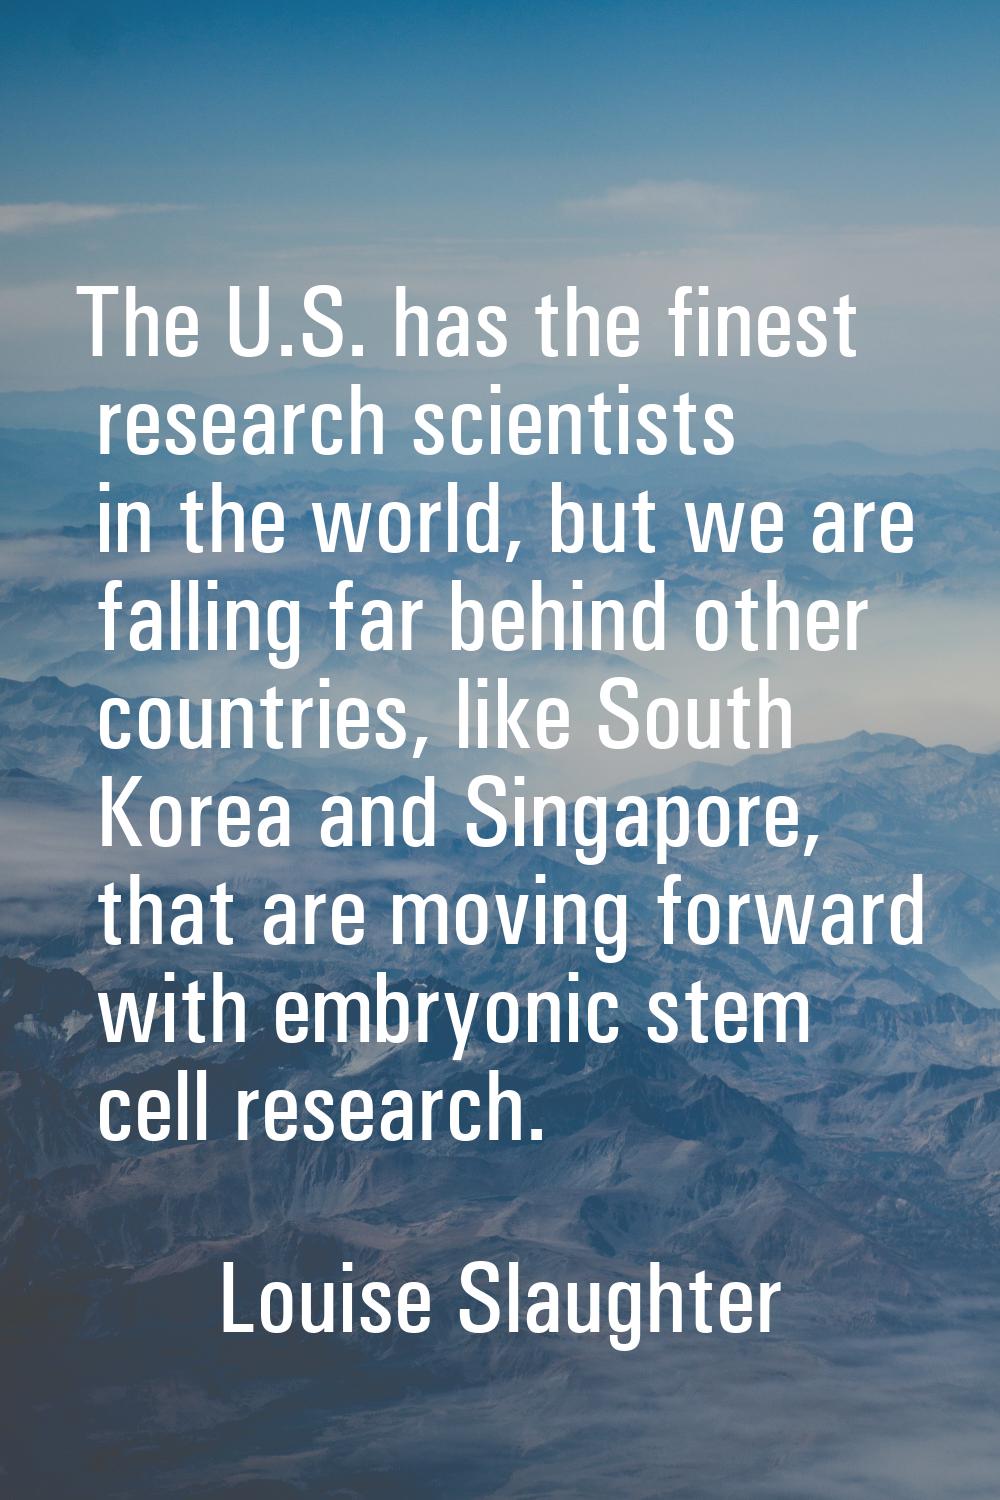 The U.S. has the finest research scientists in the world, but we are falling far behind other count